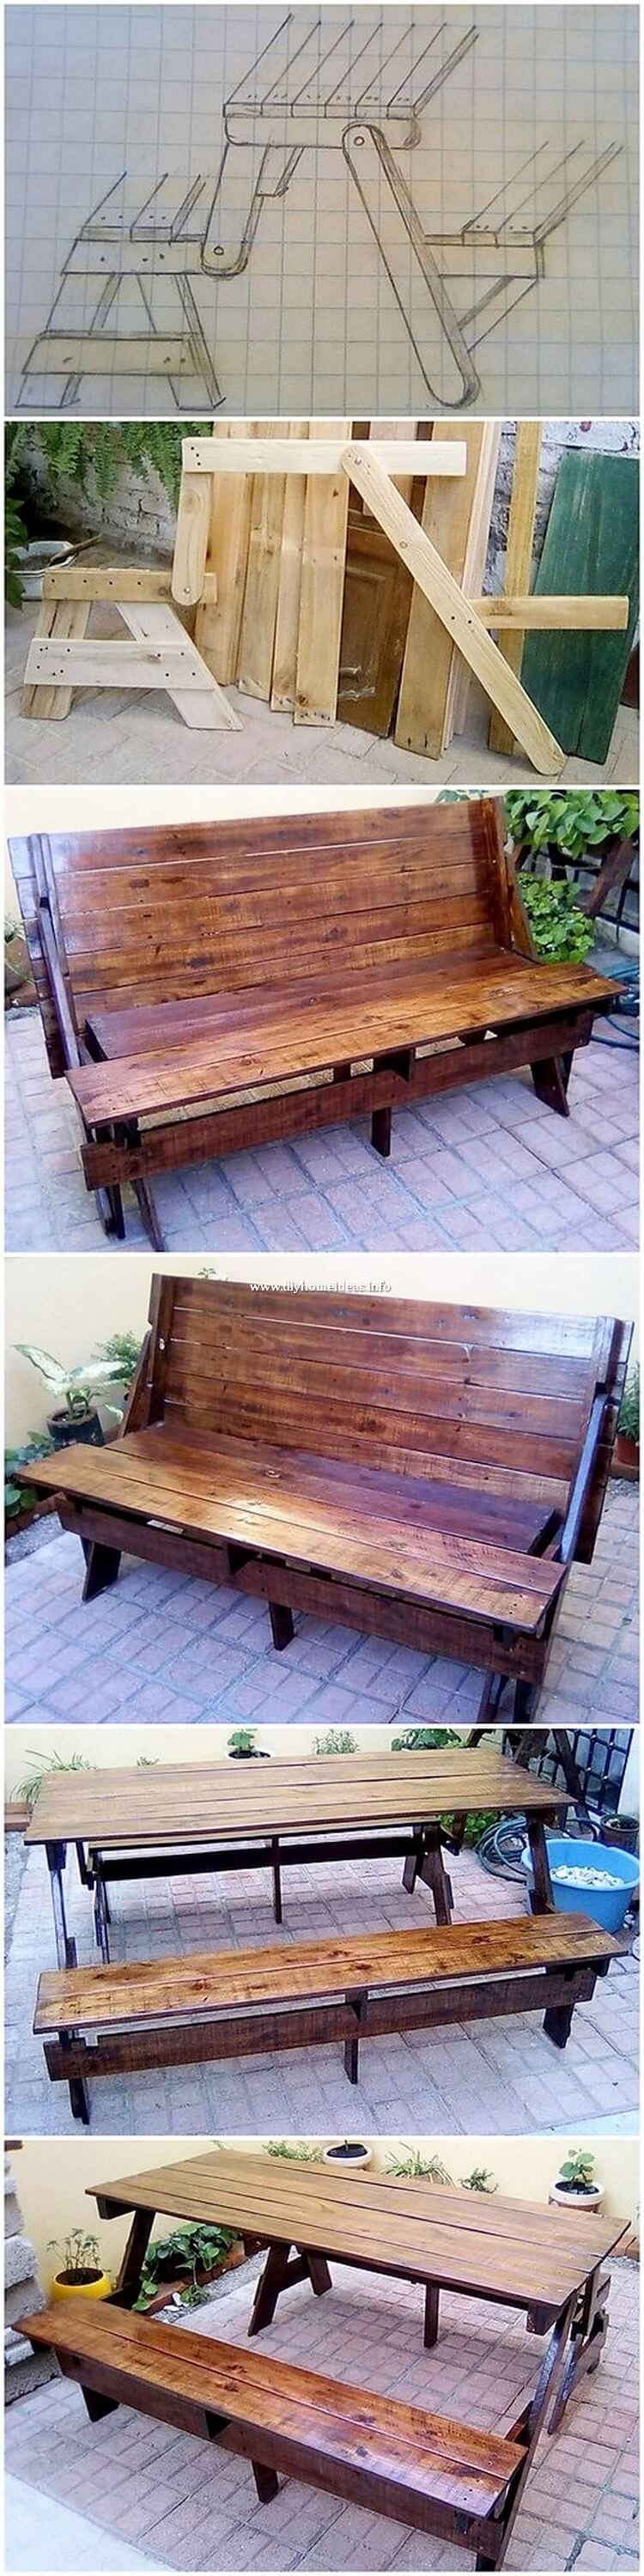 DIY Pallet Table with Benches